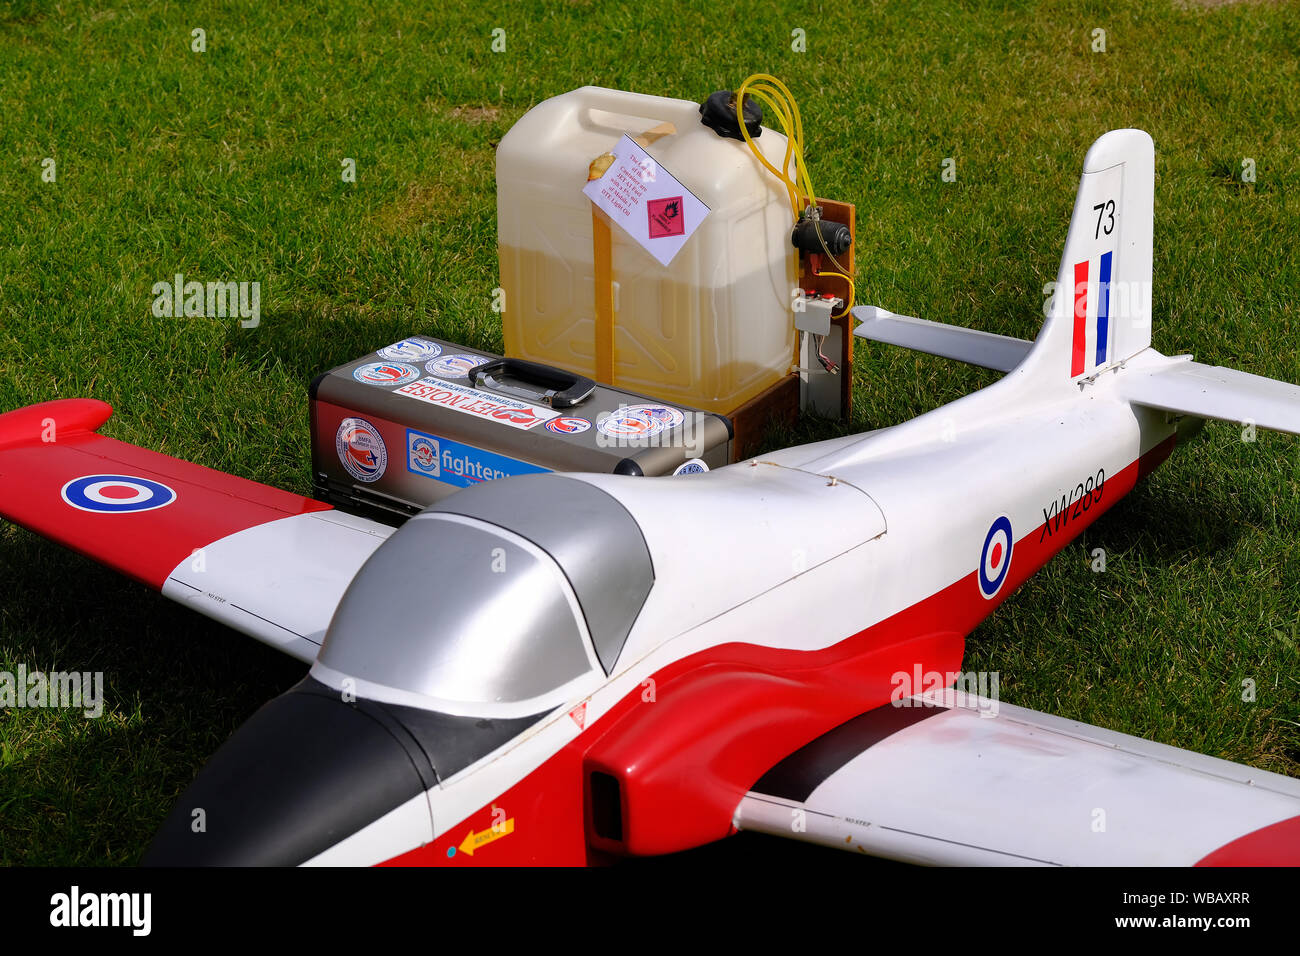 Model aircraft using scale model working jet engines to power flight. Stock Photo